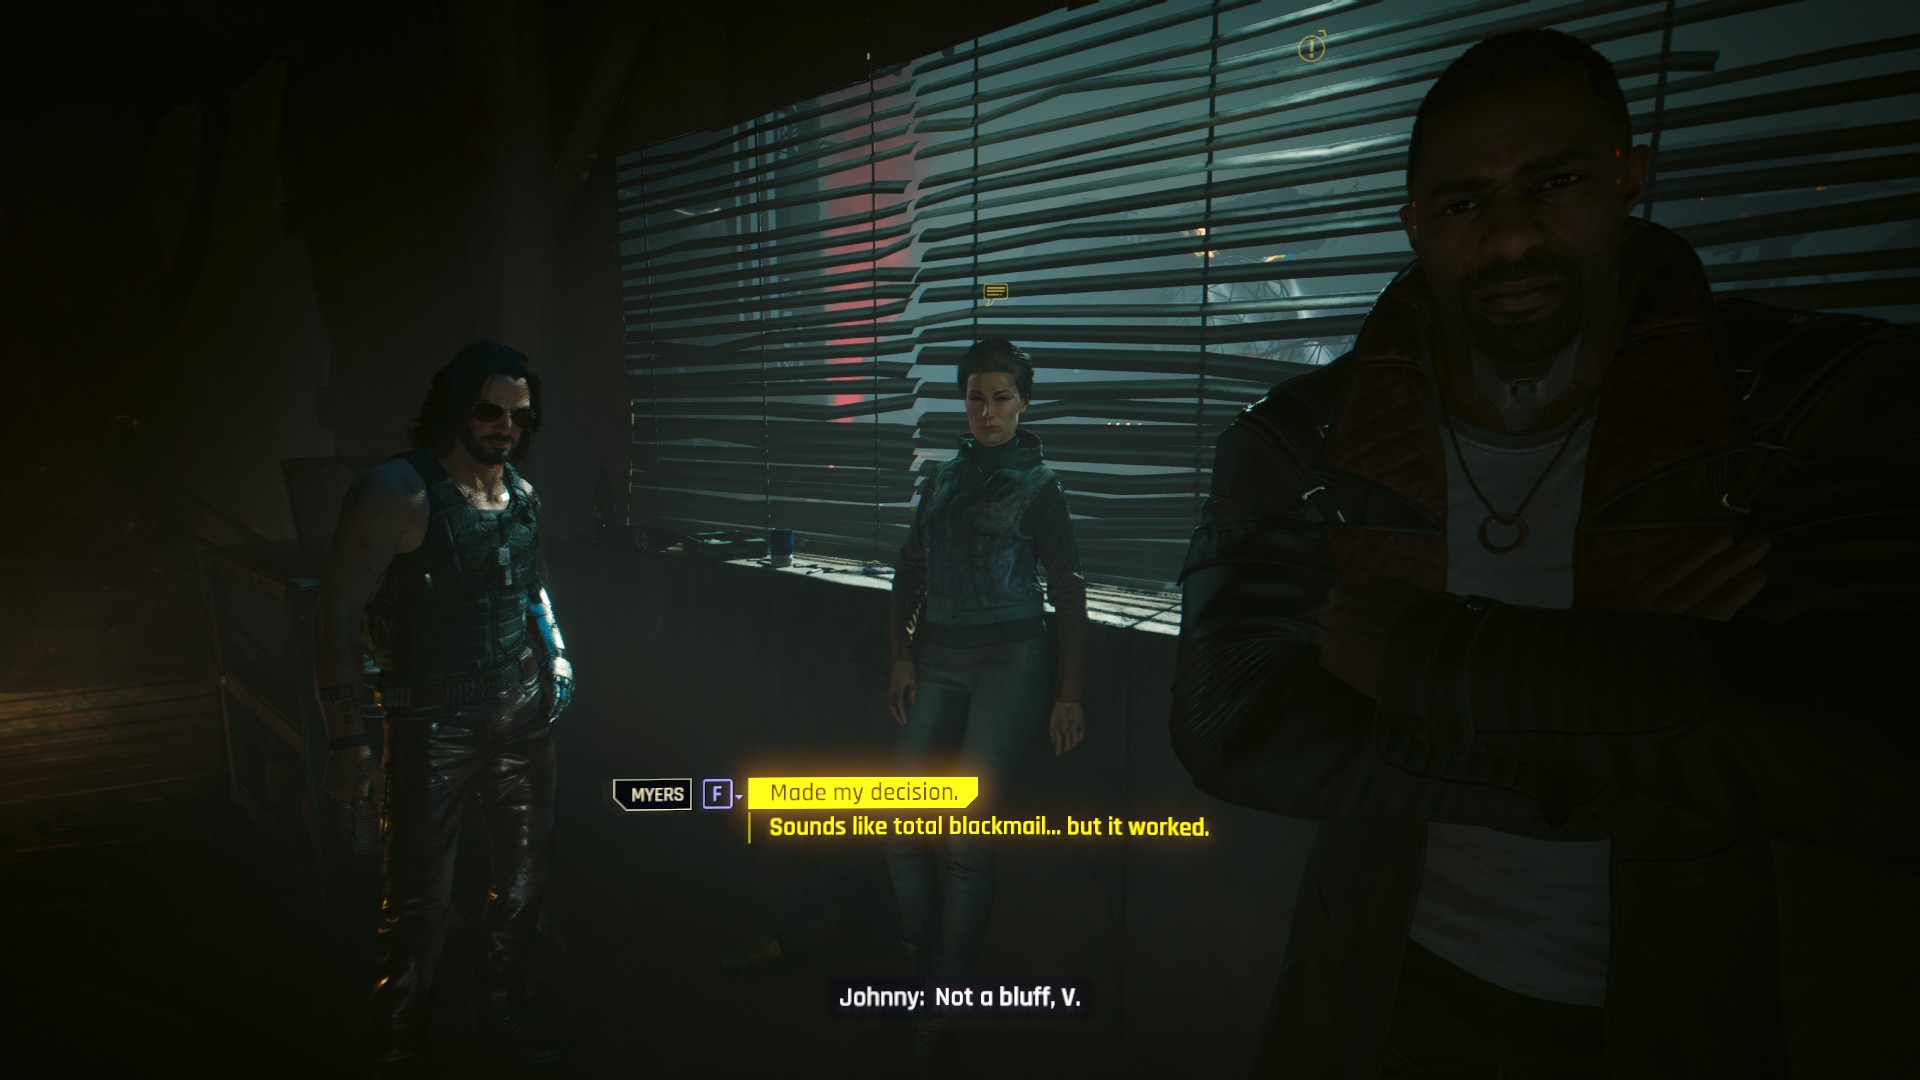 An image of three characters in a shaded room from Cyberpunk 2077, staring intently at the player, who is asked to make a difficult choice.